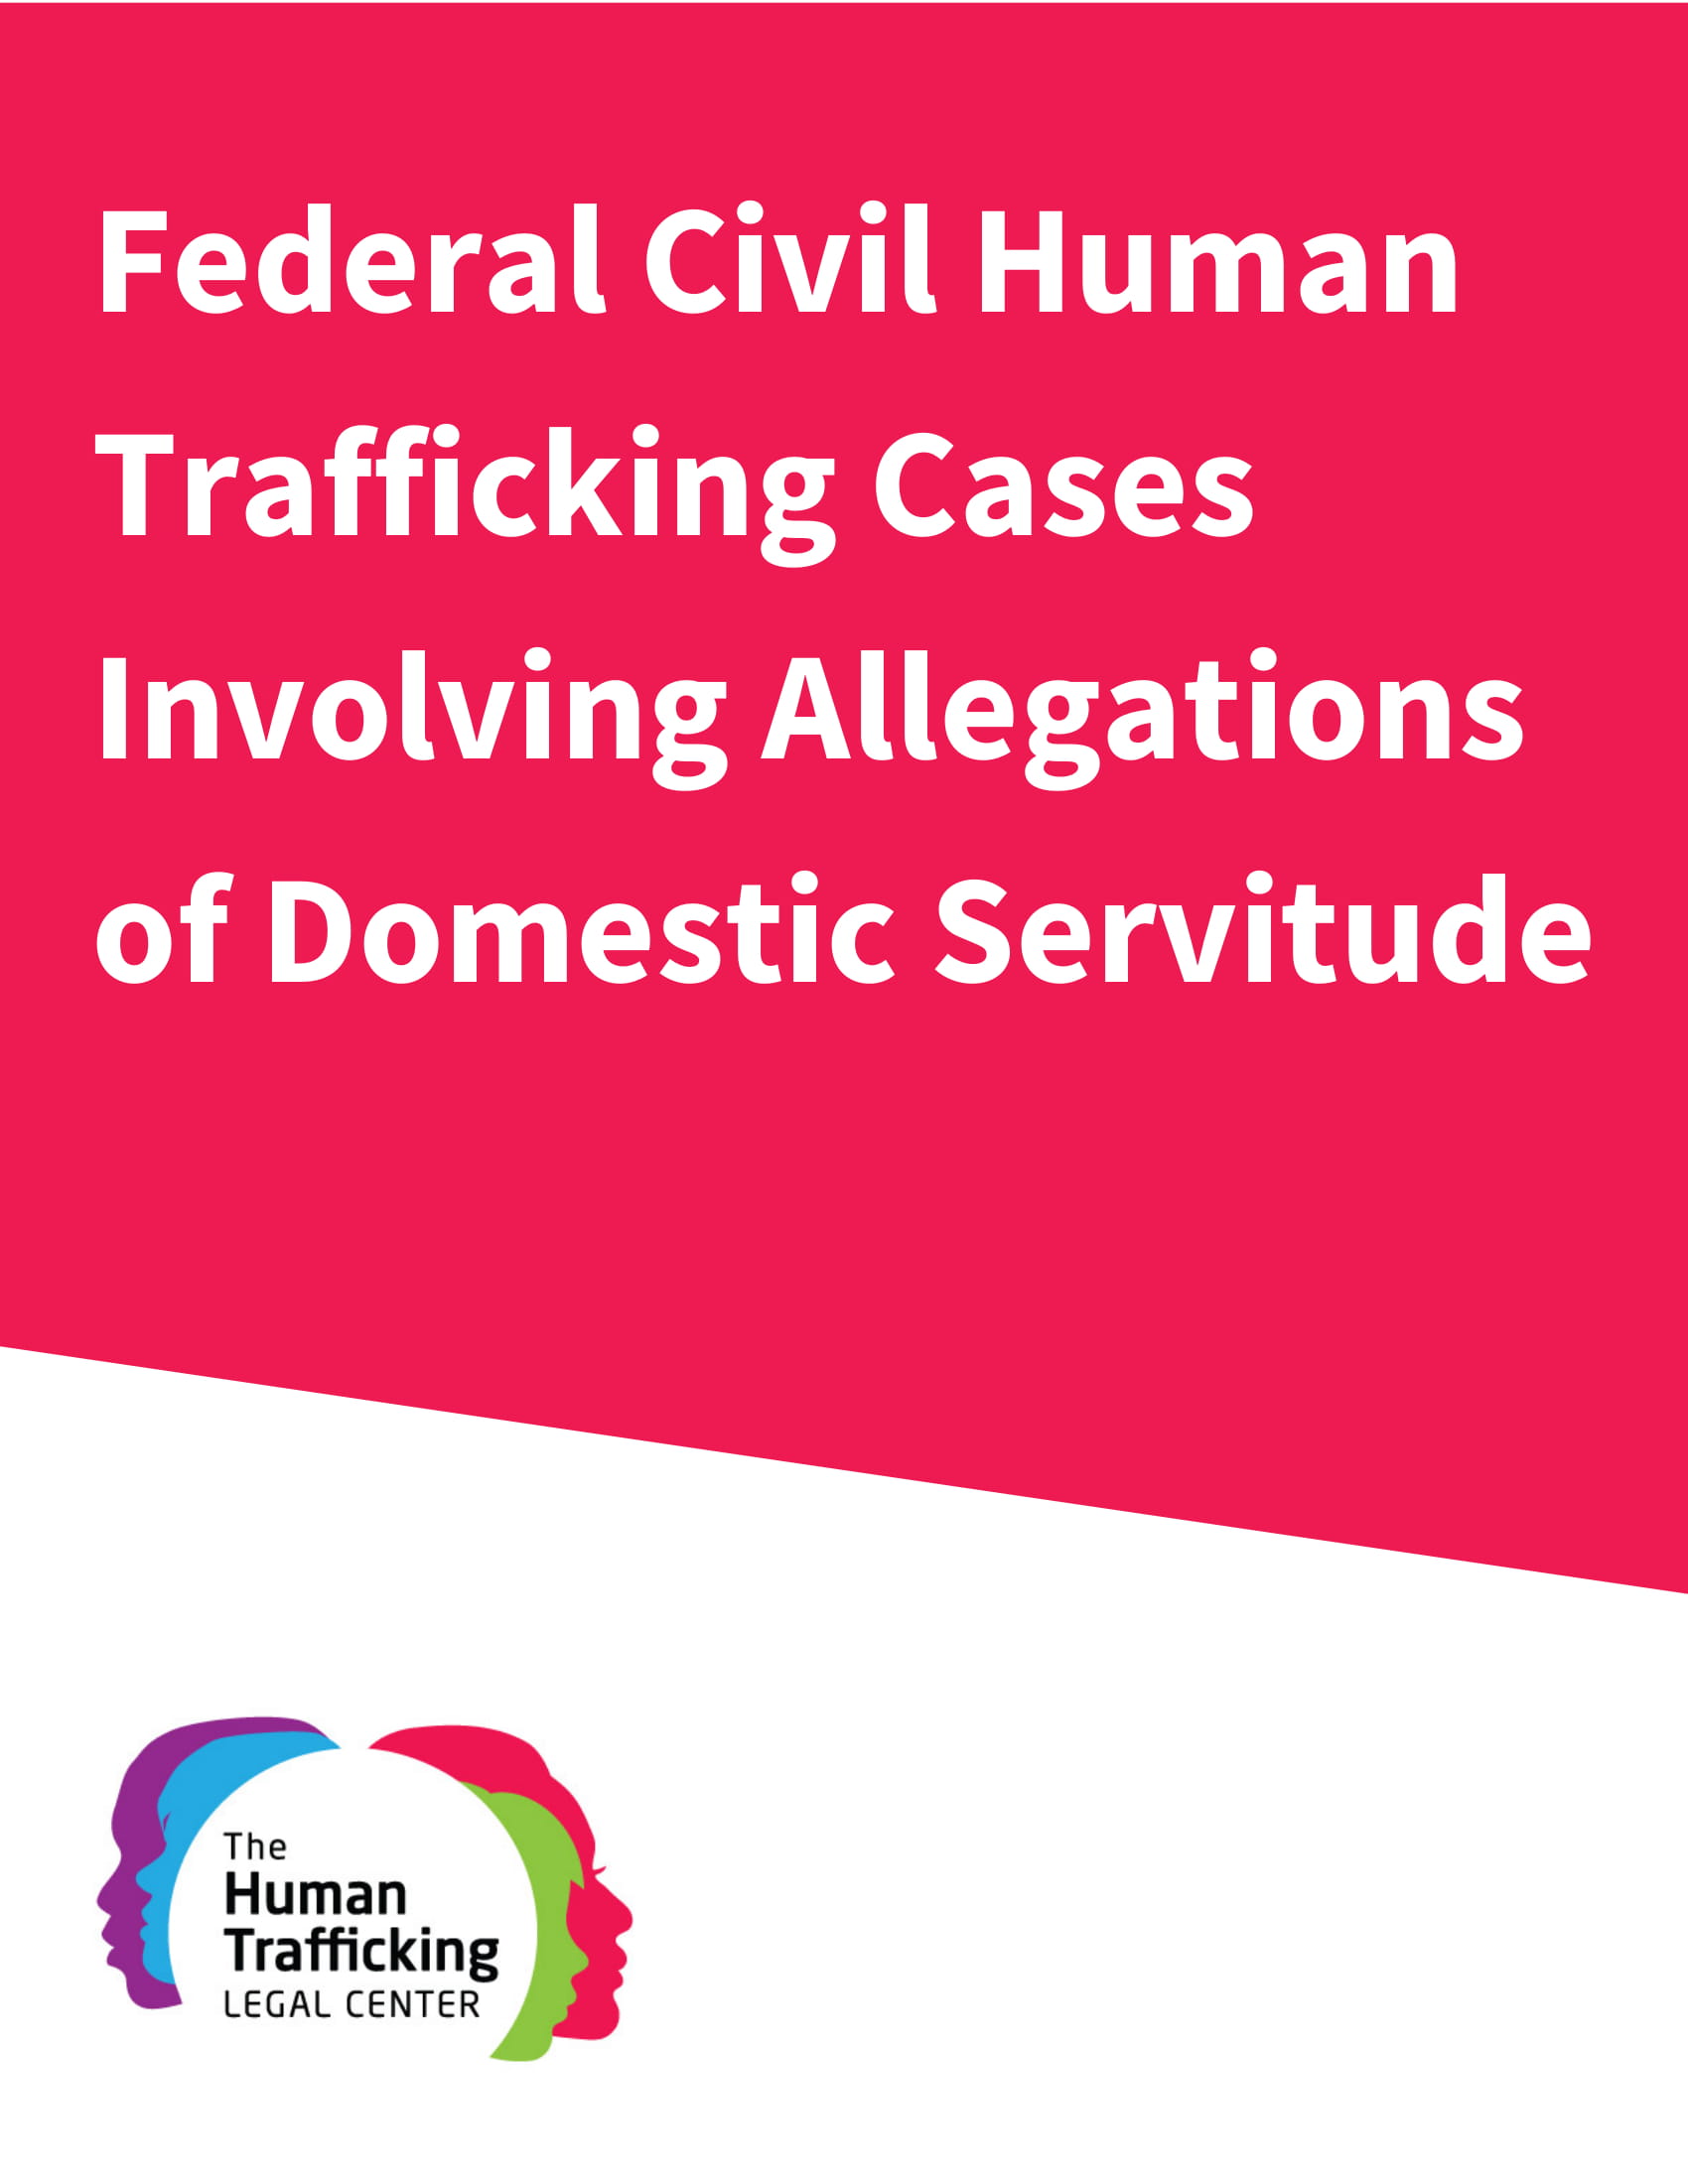 Federal Civil Human Trafficking Cases Involving Allegations of Domestic Servitude